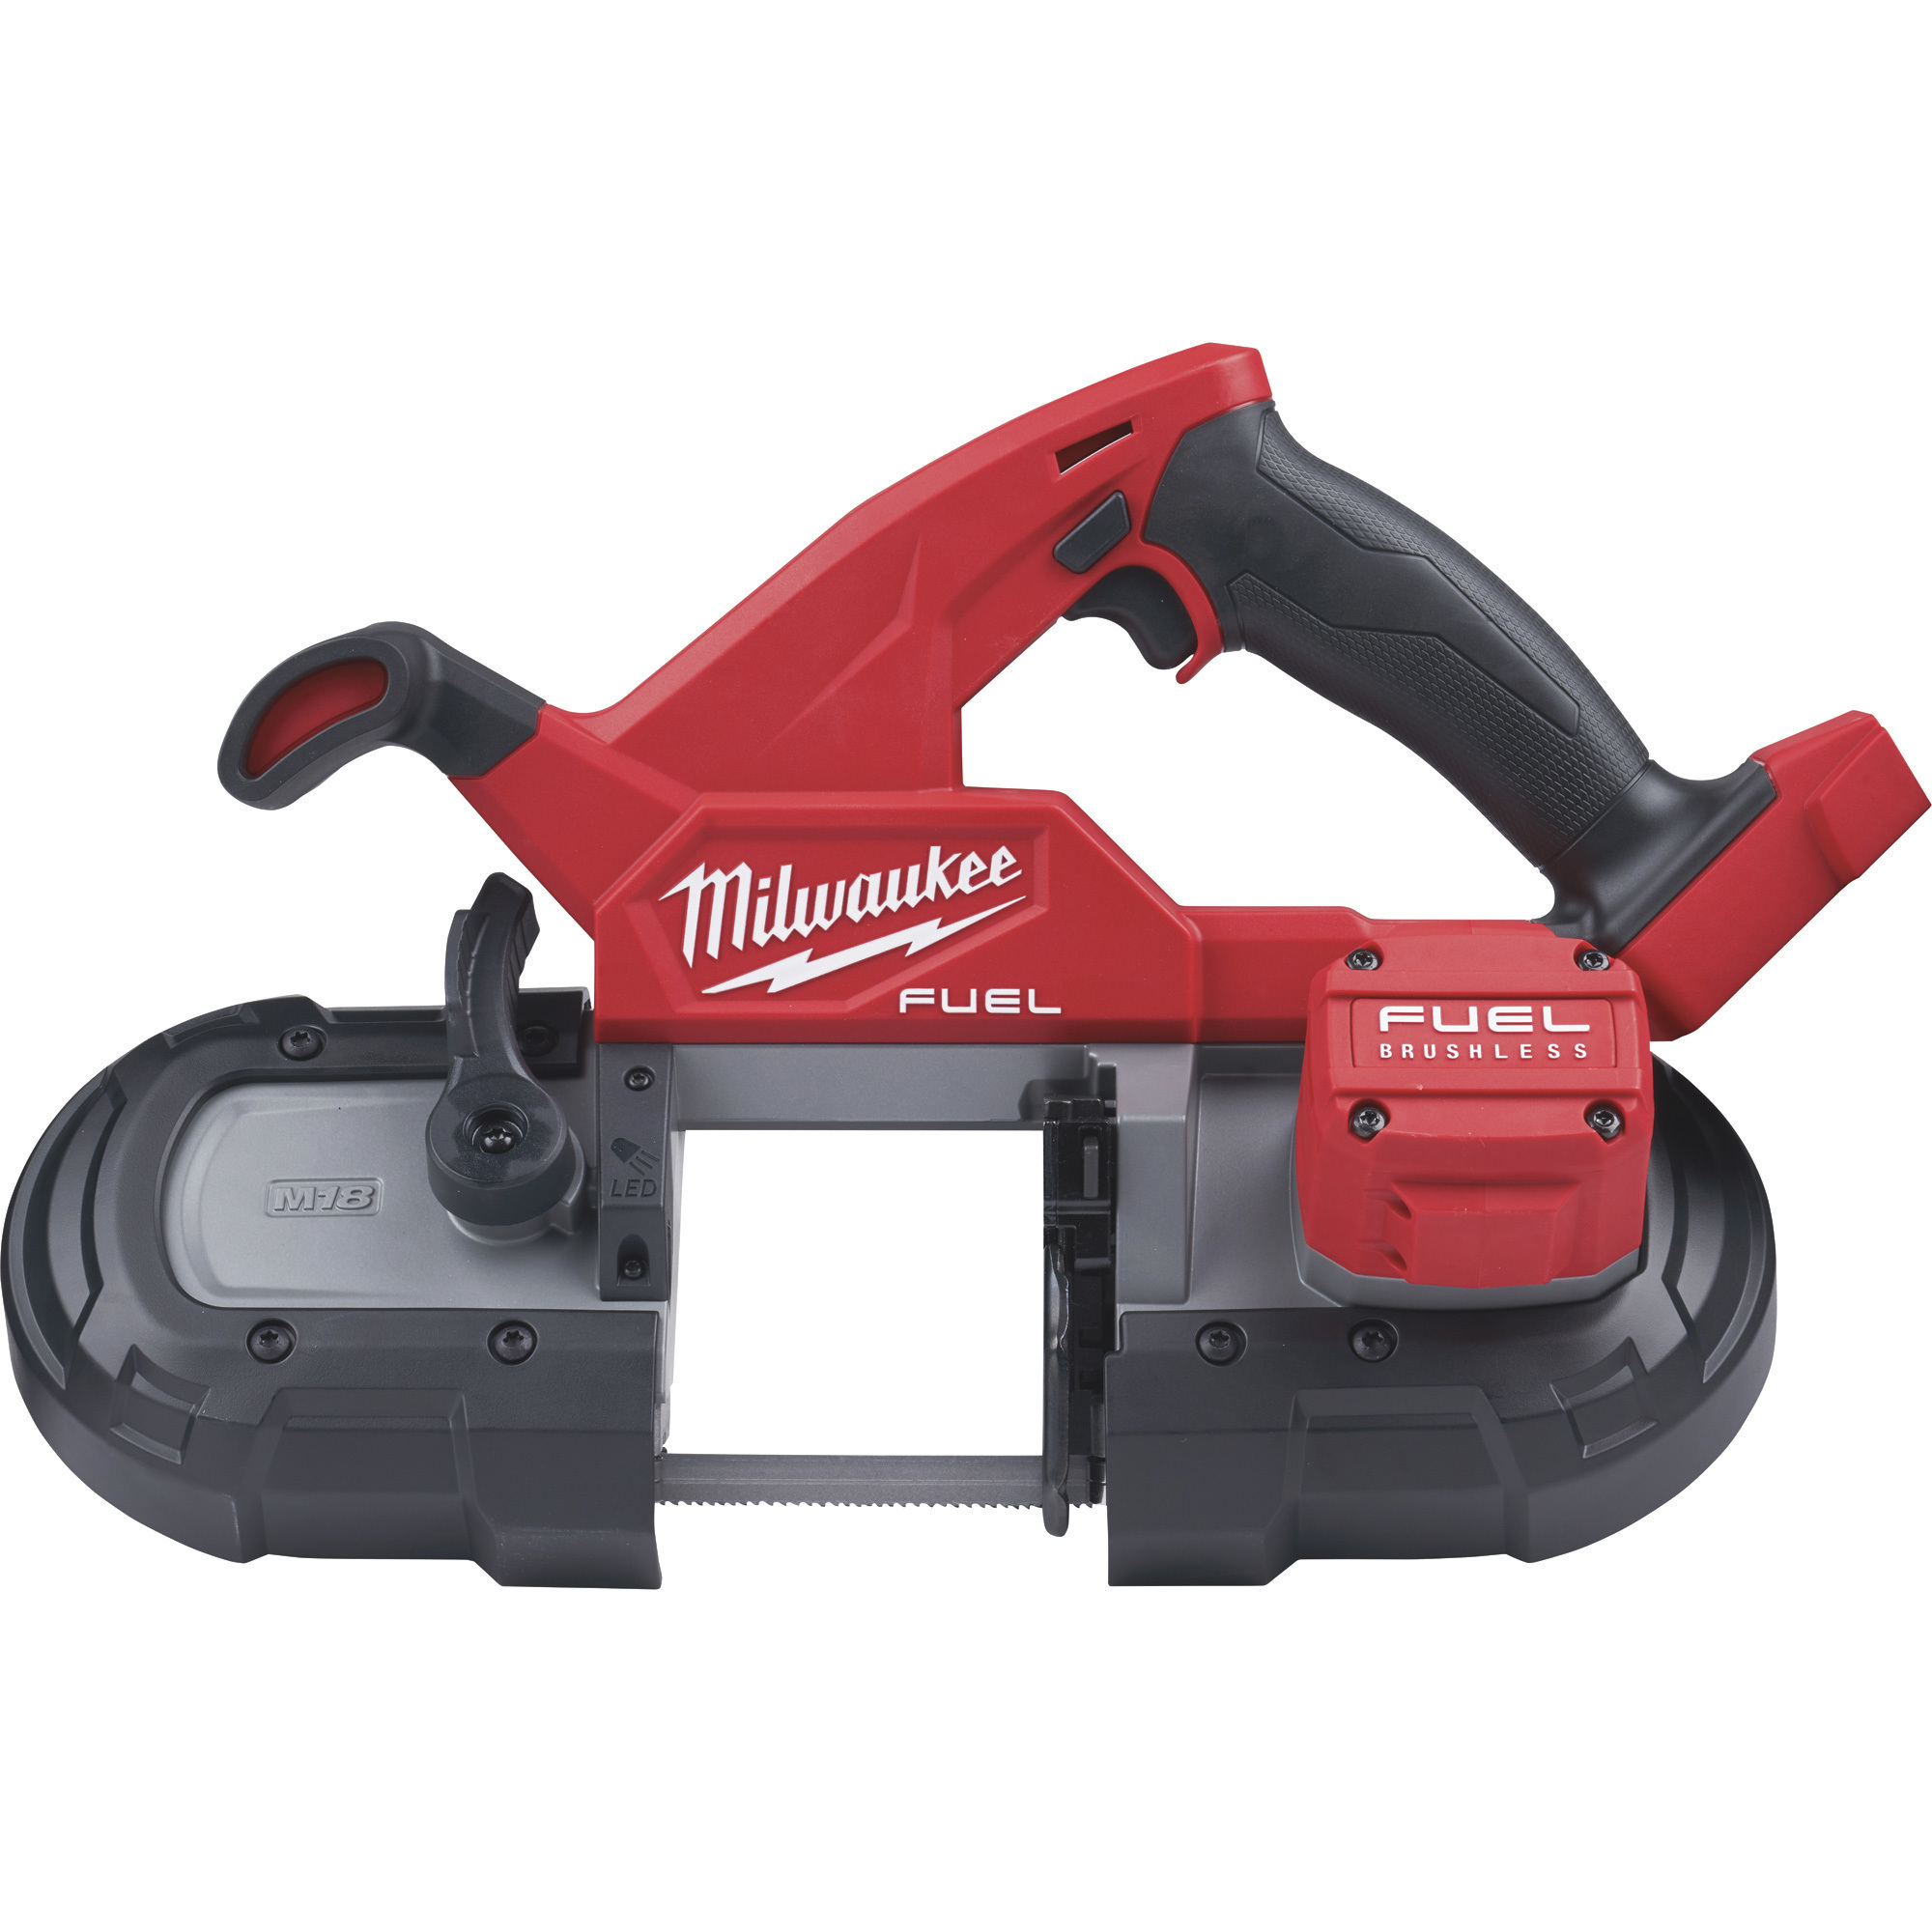 Milwaukee M18 FUEL Compact Cordless Band Saw, Tool Only, Model 2829-20